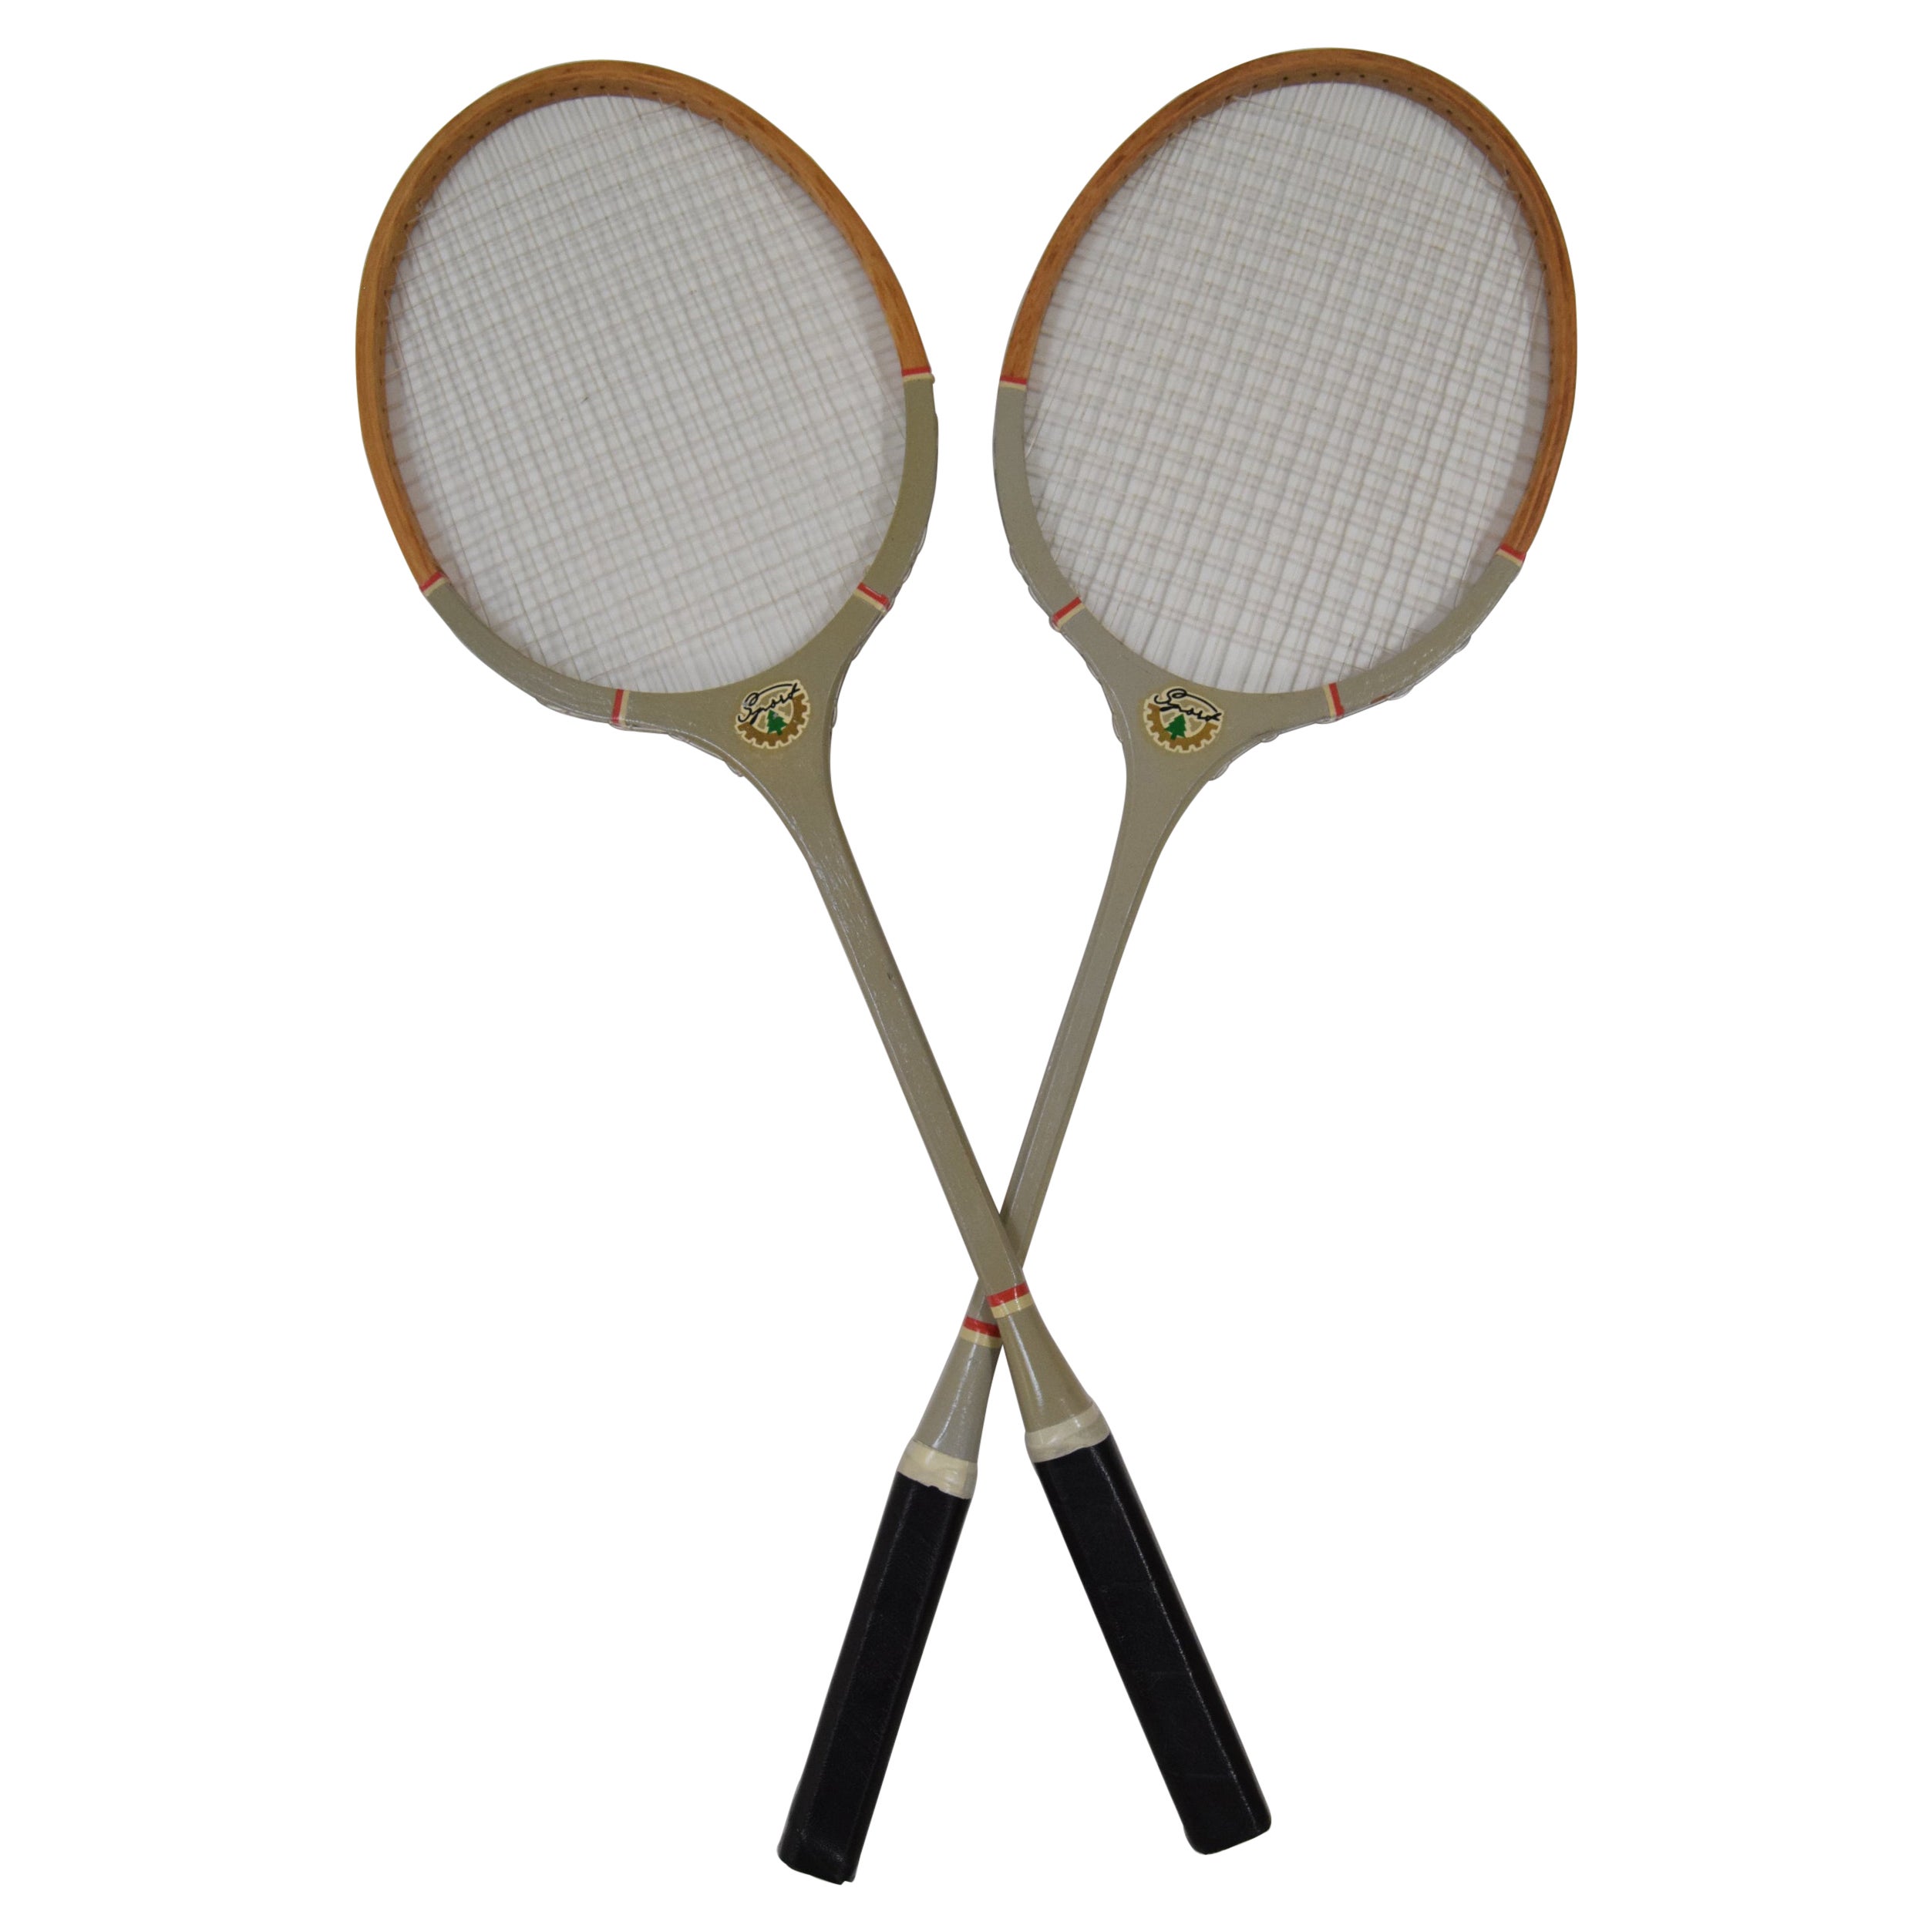 Pair of Vintage Badminton Rackets, circa 1970's For Sale at 1stDibs